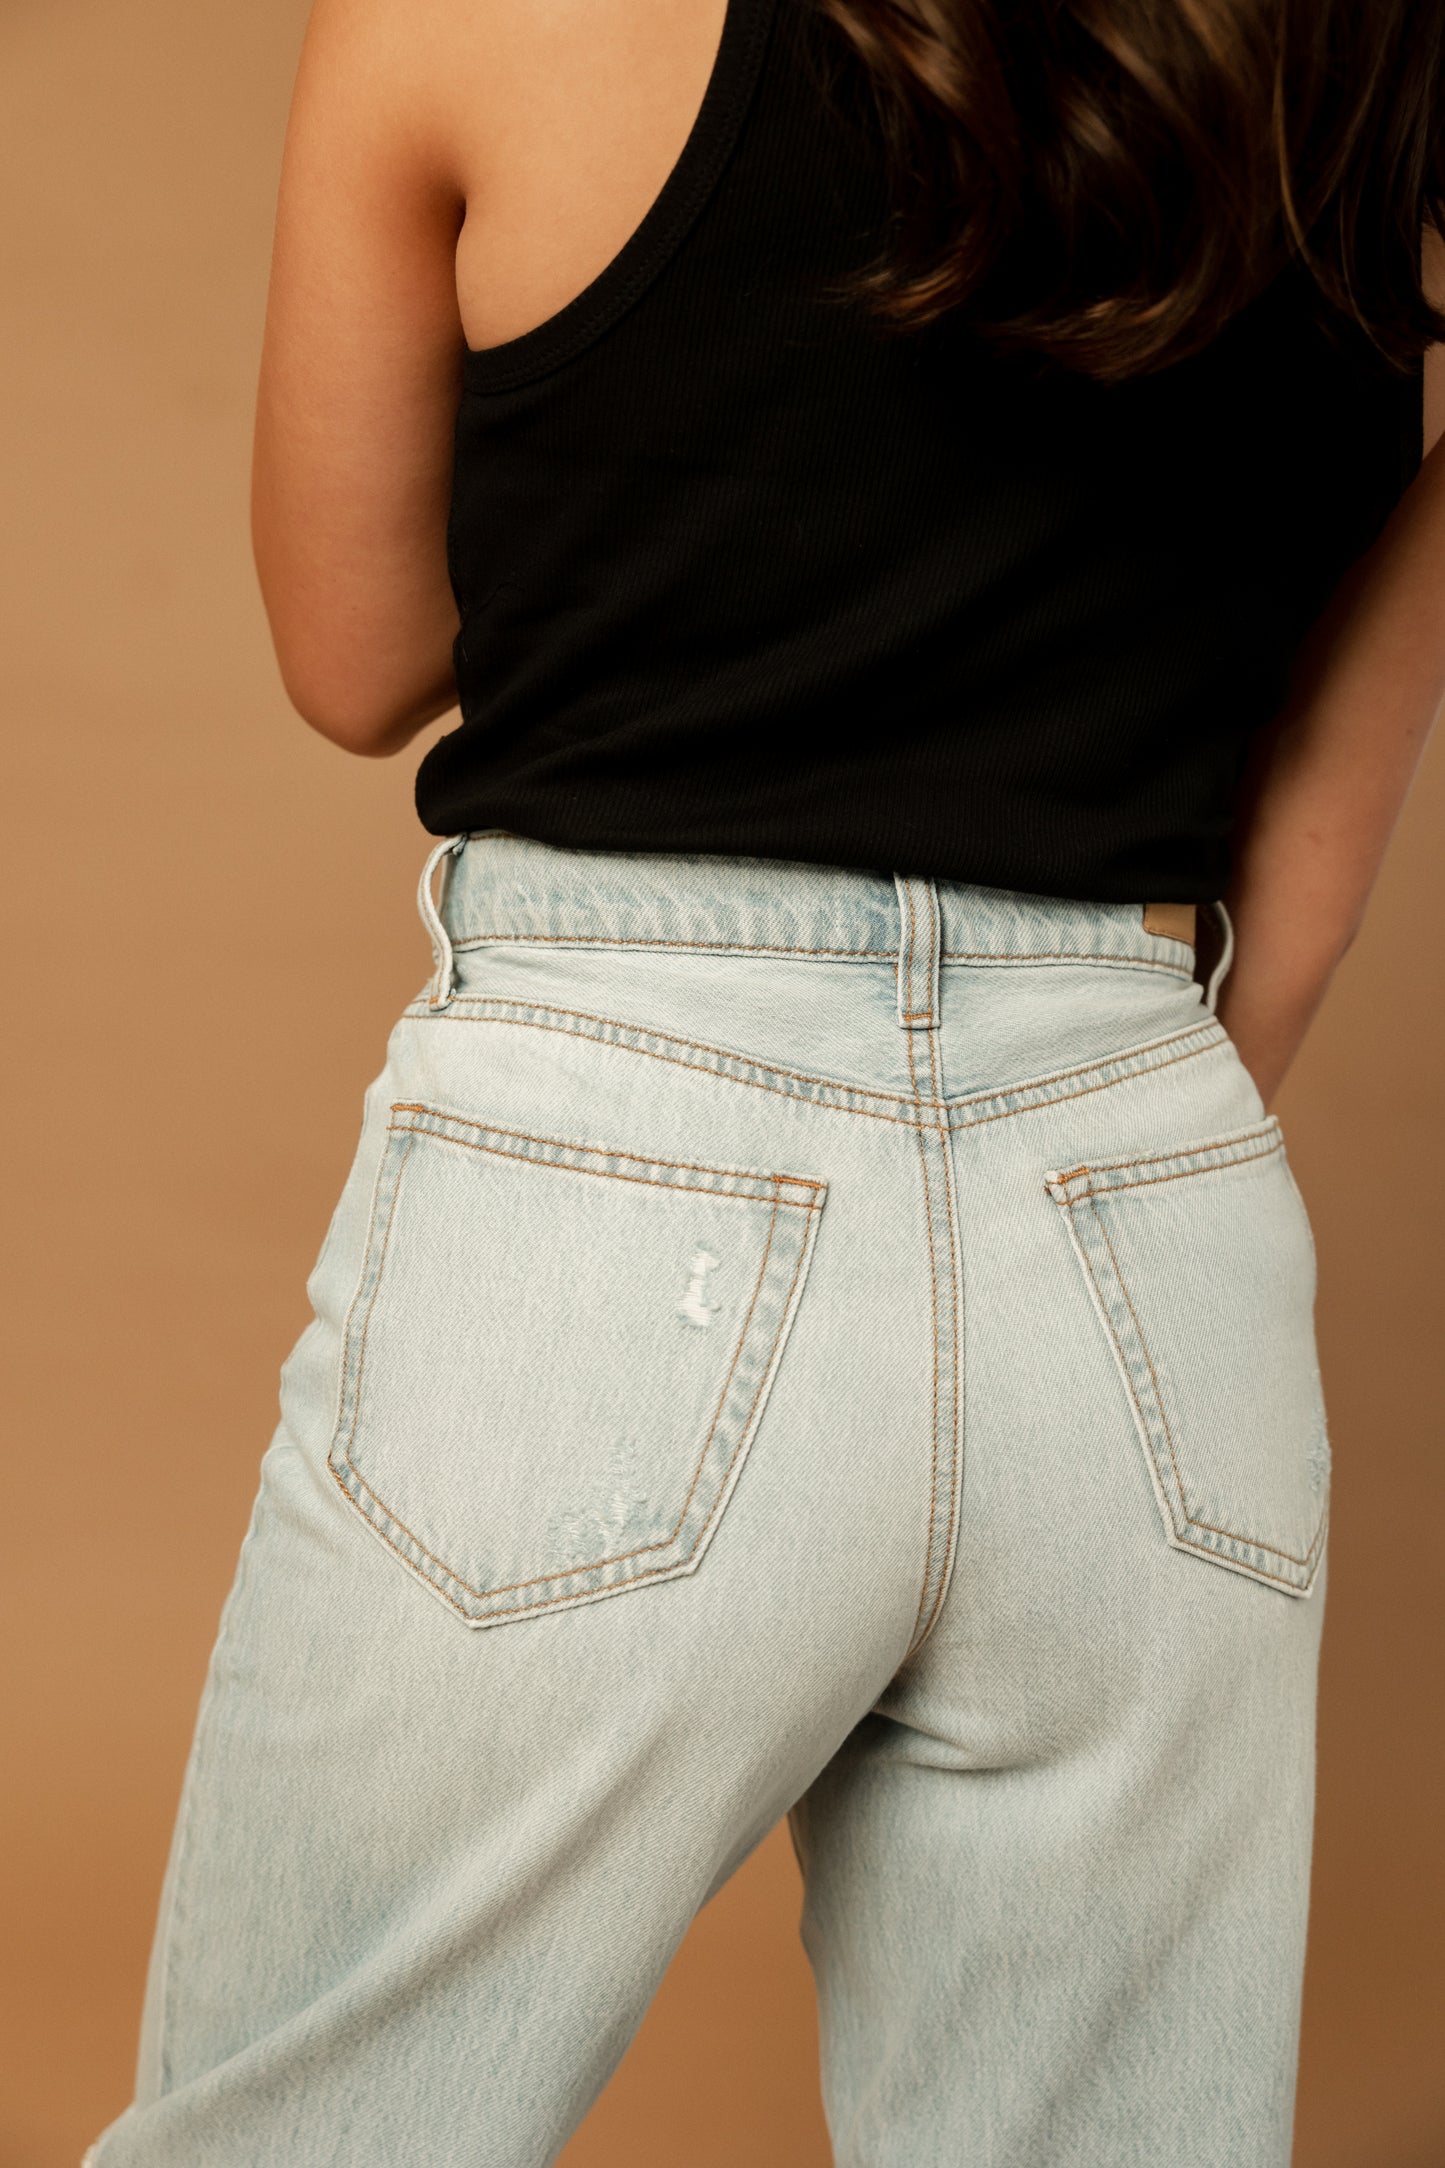 THESE ARE WHAT JEANS ARE MADE OF